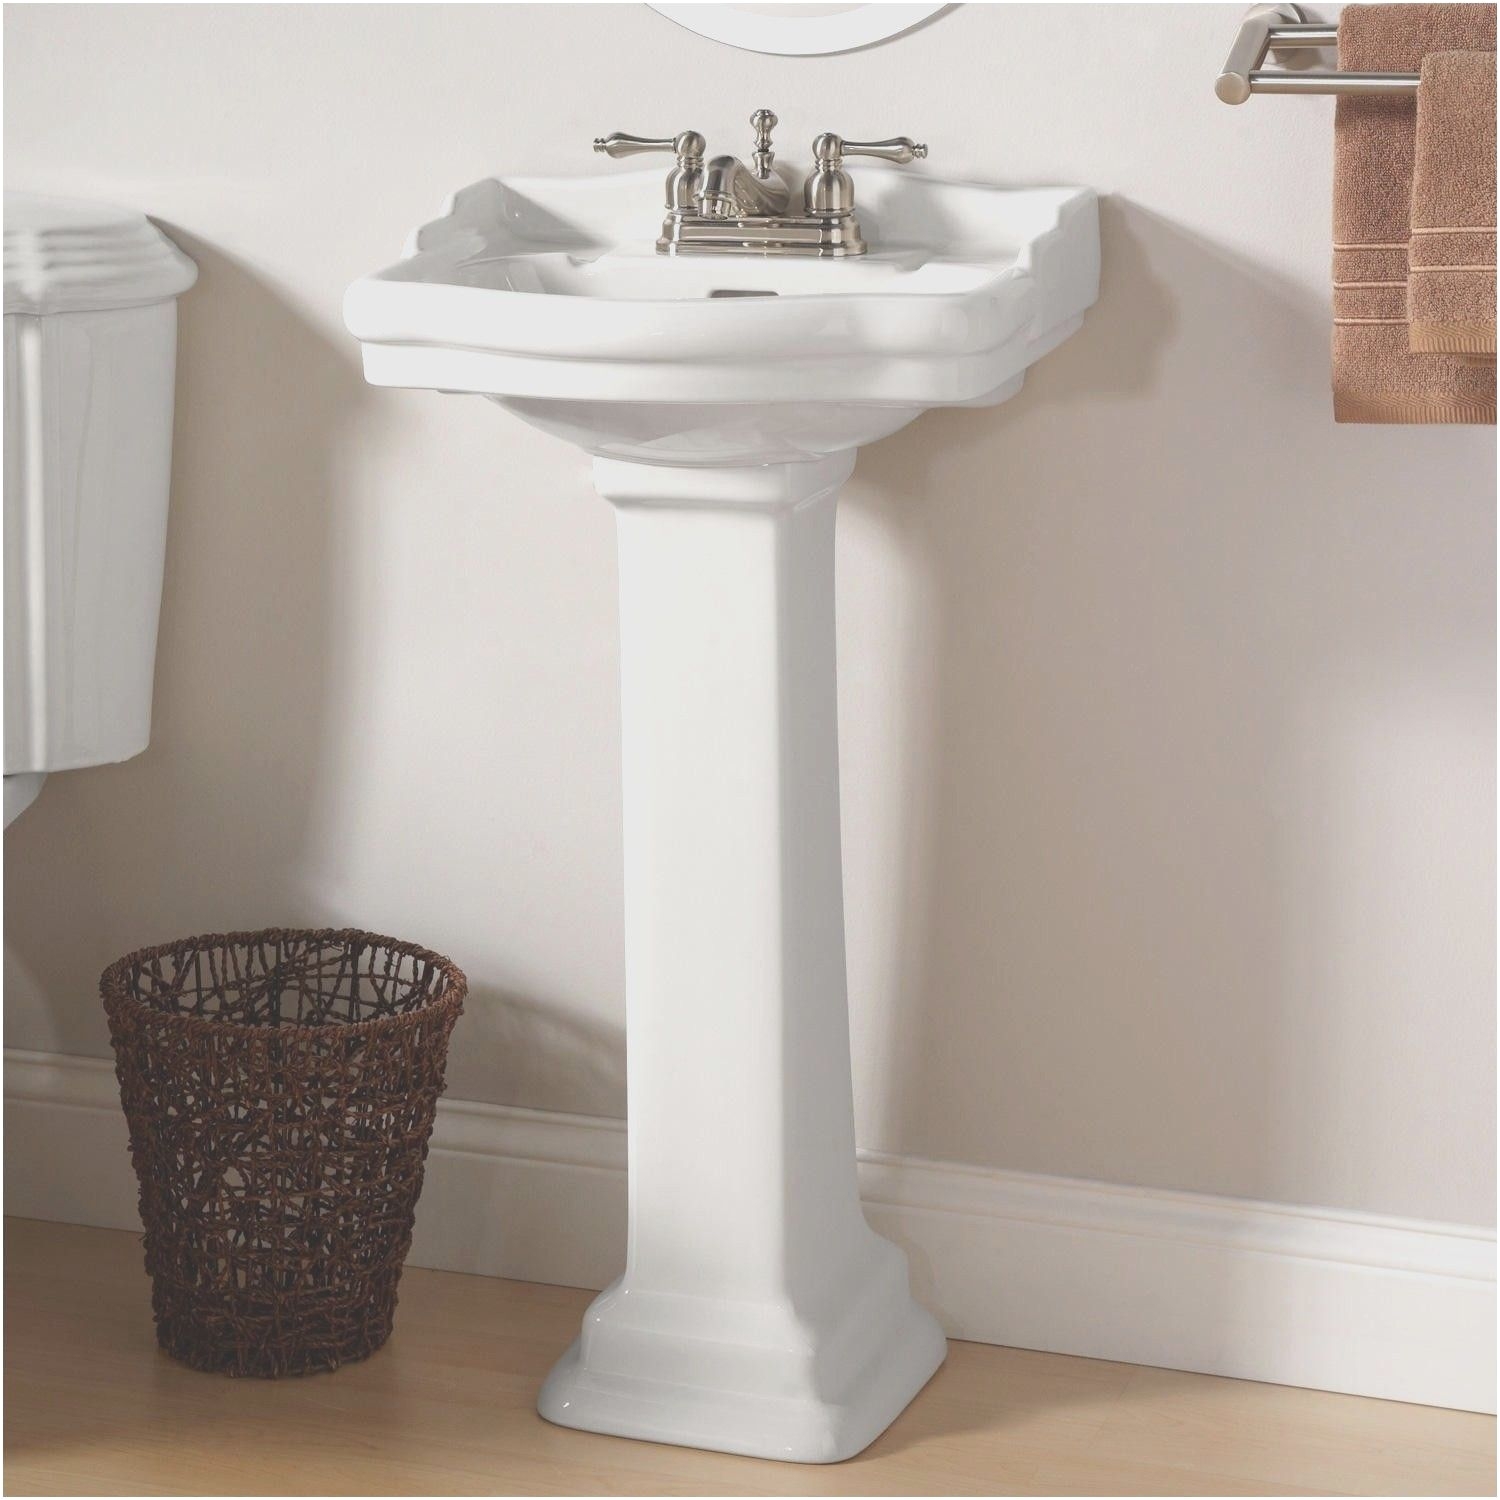 Small Bathroom with Pedestal Sink Ideas Best Stunning 511 20 Wh 1 Lgh Sink Cheviot Small Mayfair Pedestal 1i 0d You Gonna Love